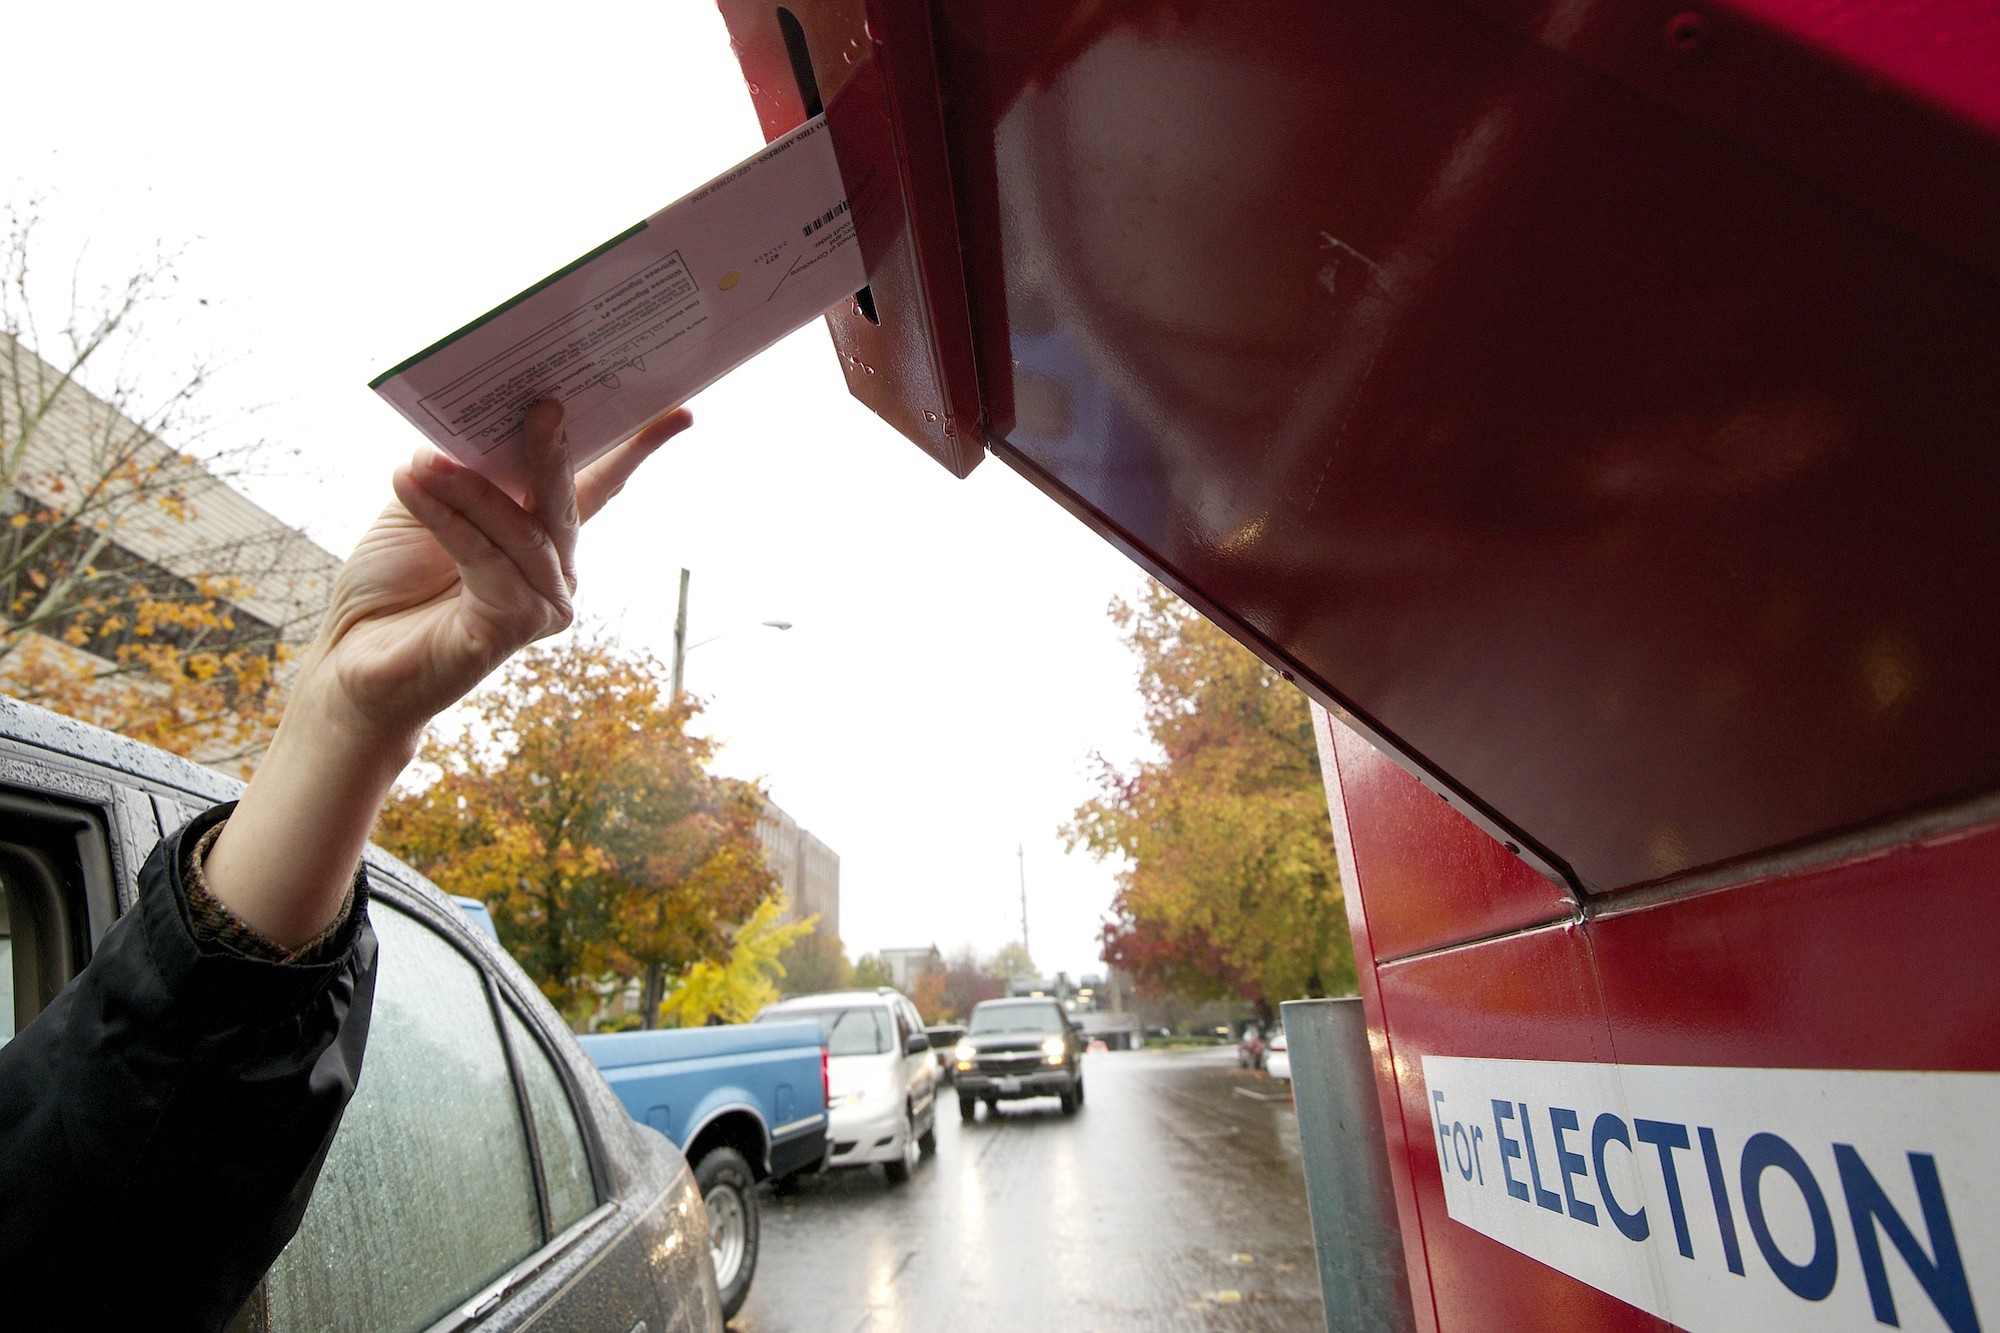 Voters use a drive-up collection box to cast their ballots in November 2013 near the Clark County elections office, 1408 Franklin St., in downtown Vancouver. They have until 8 p.m. today to drop their ballots in one of the drop boxes located throughout the county.